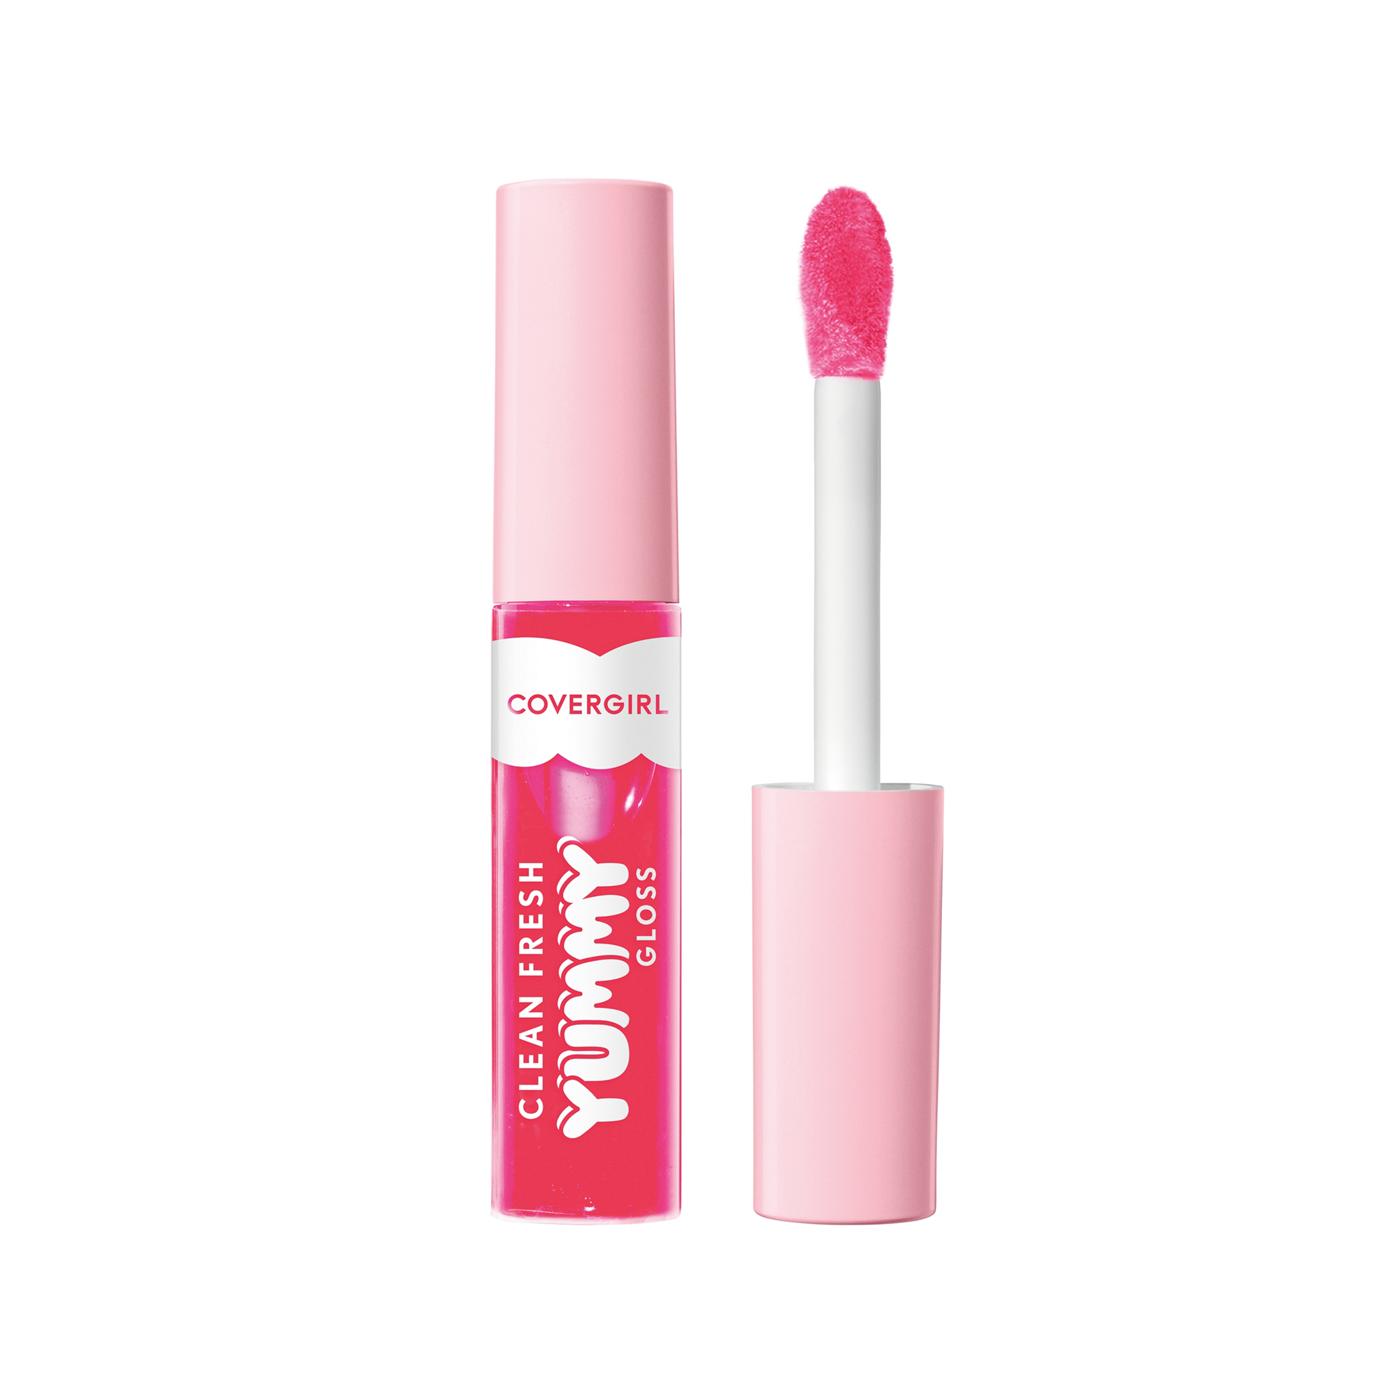 Covergirl Clean Fresh Yummy Lip Gloss - But First a Cosmo; image 1 of 9